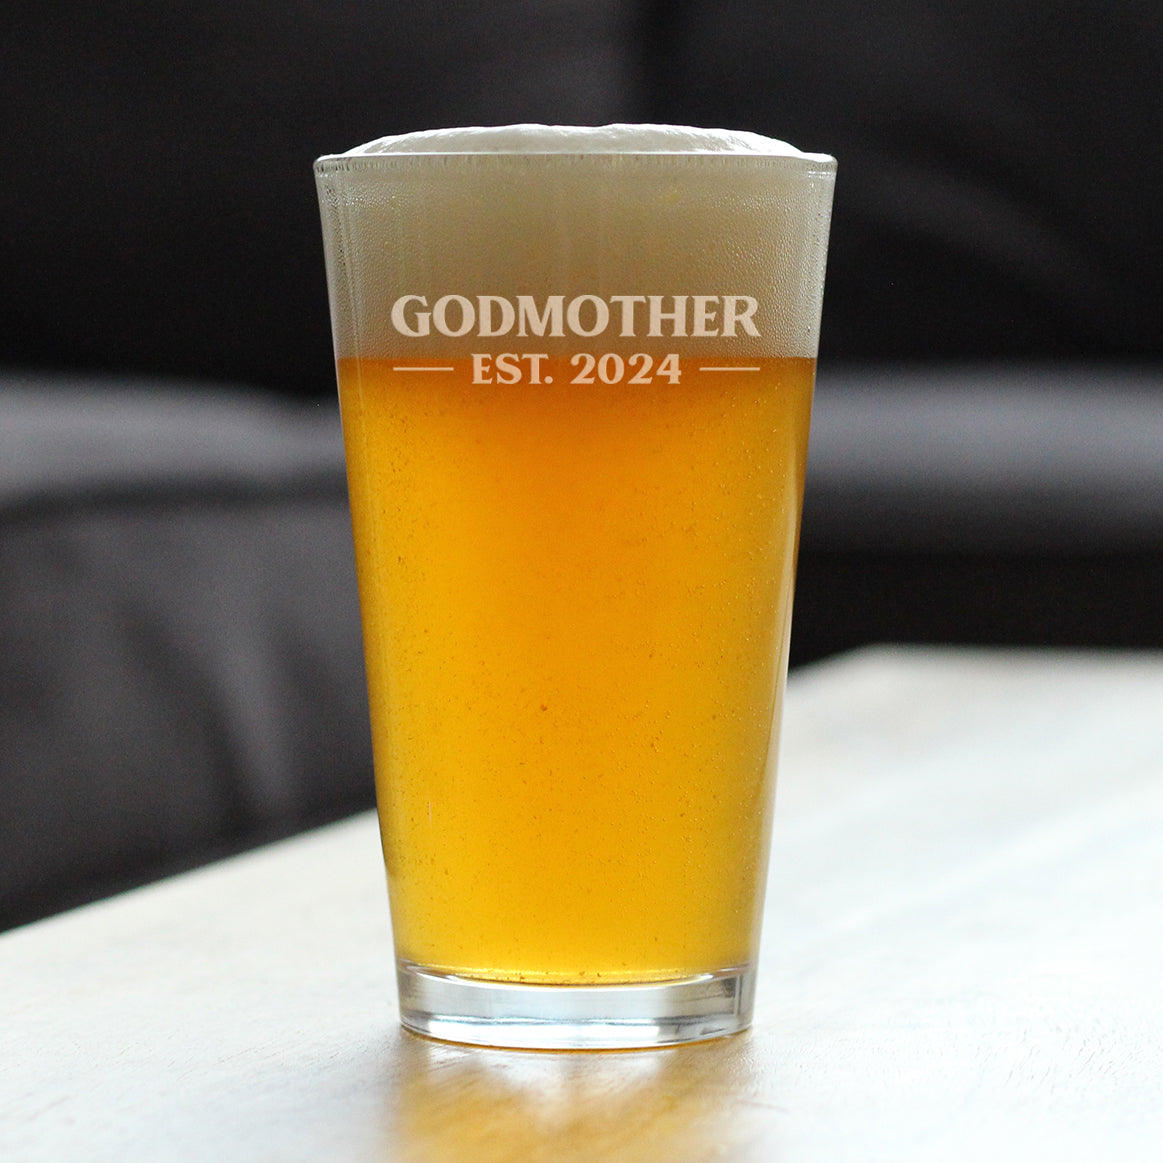 Godmother Est 2024 - New Godmother Pint Glass Proposal Gift for First Time Godparents - Bold 16 Oz Glasses